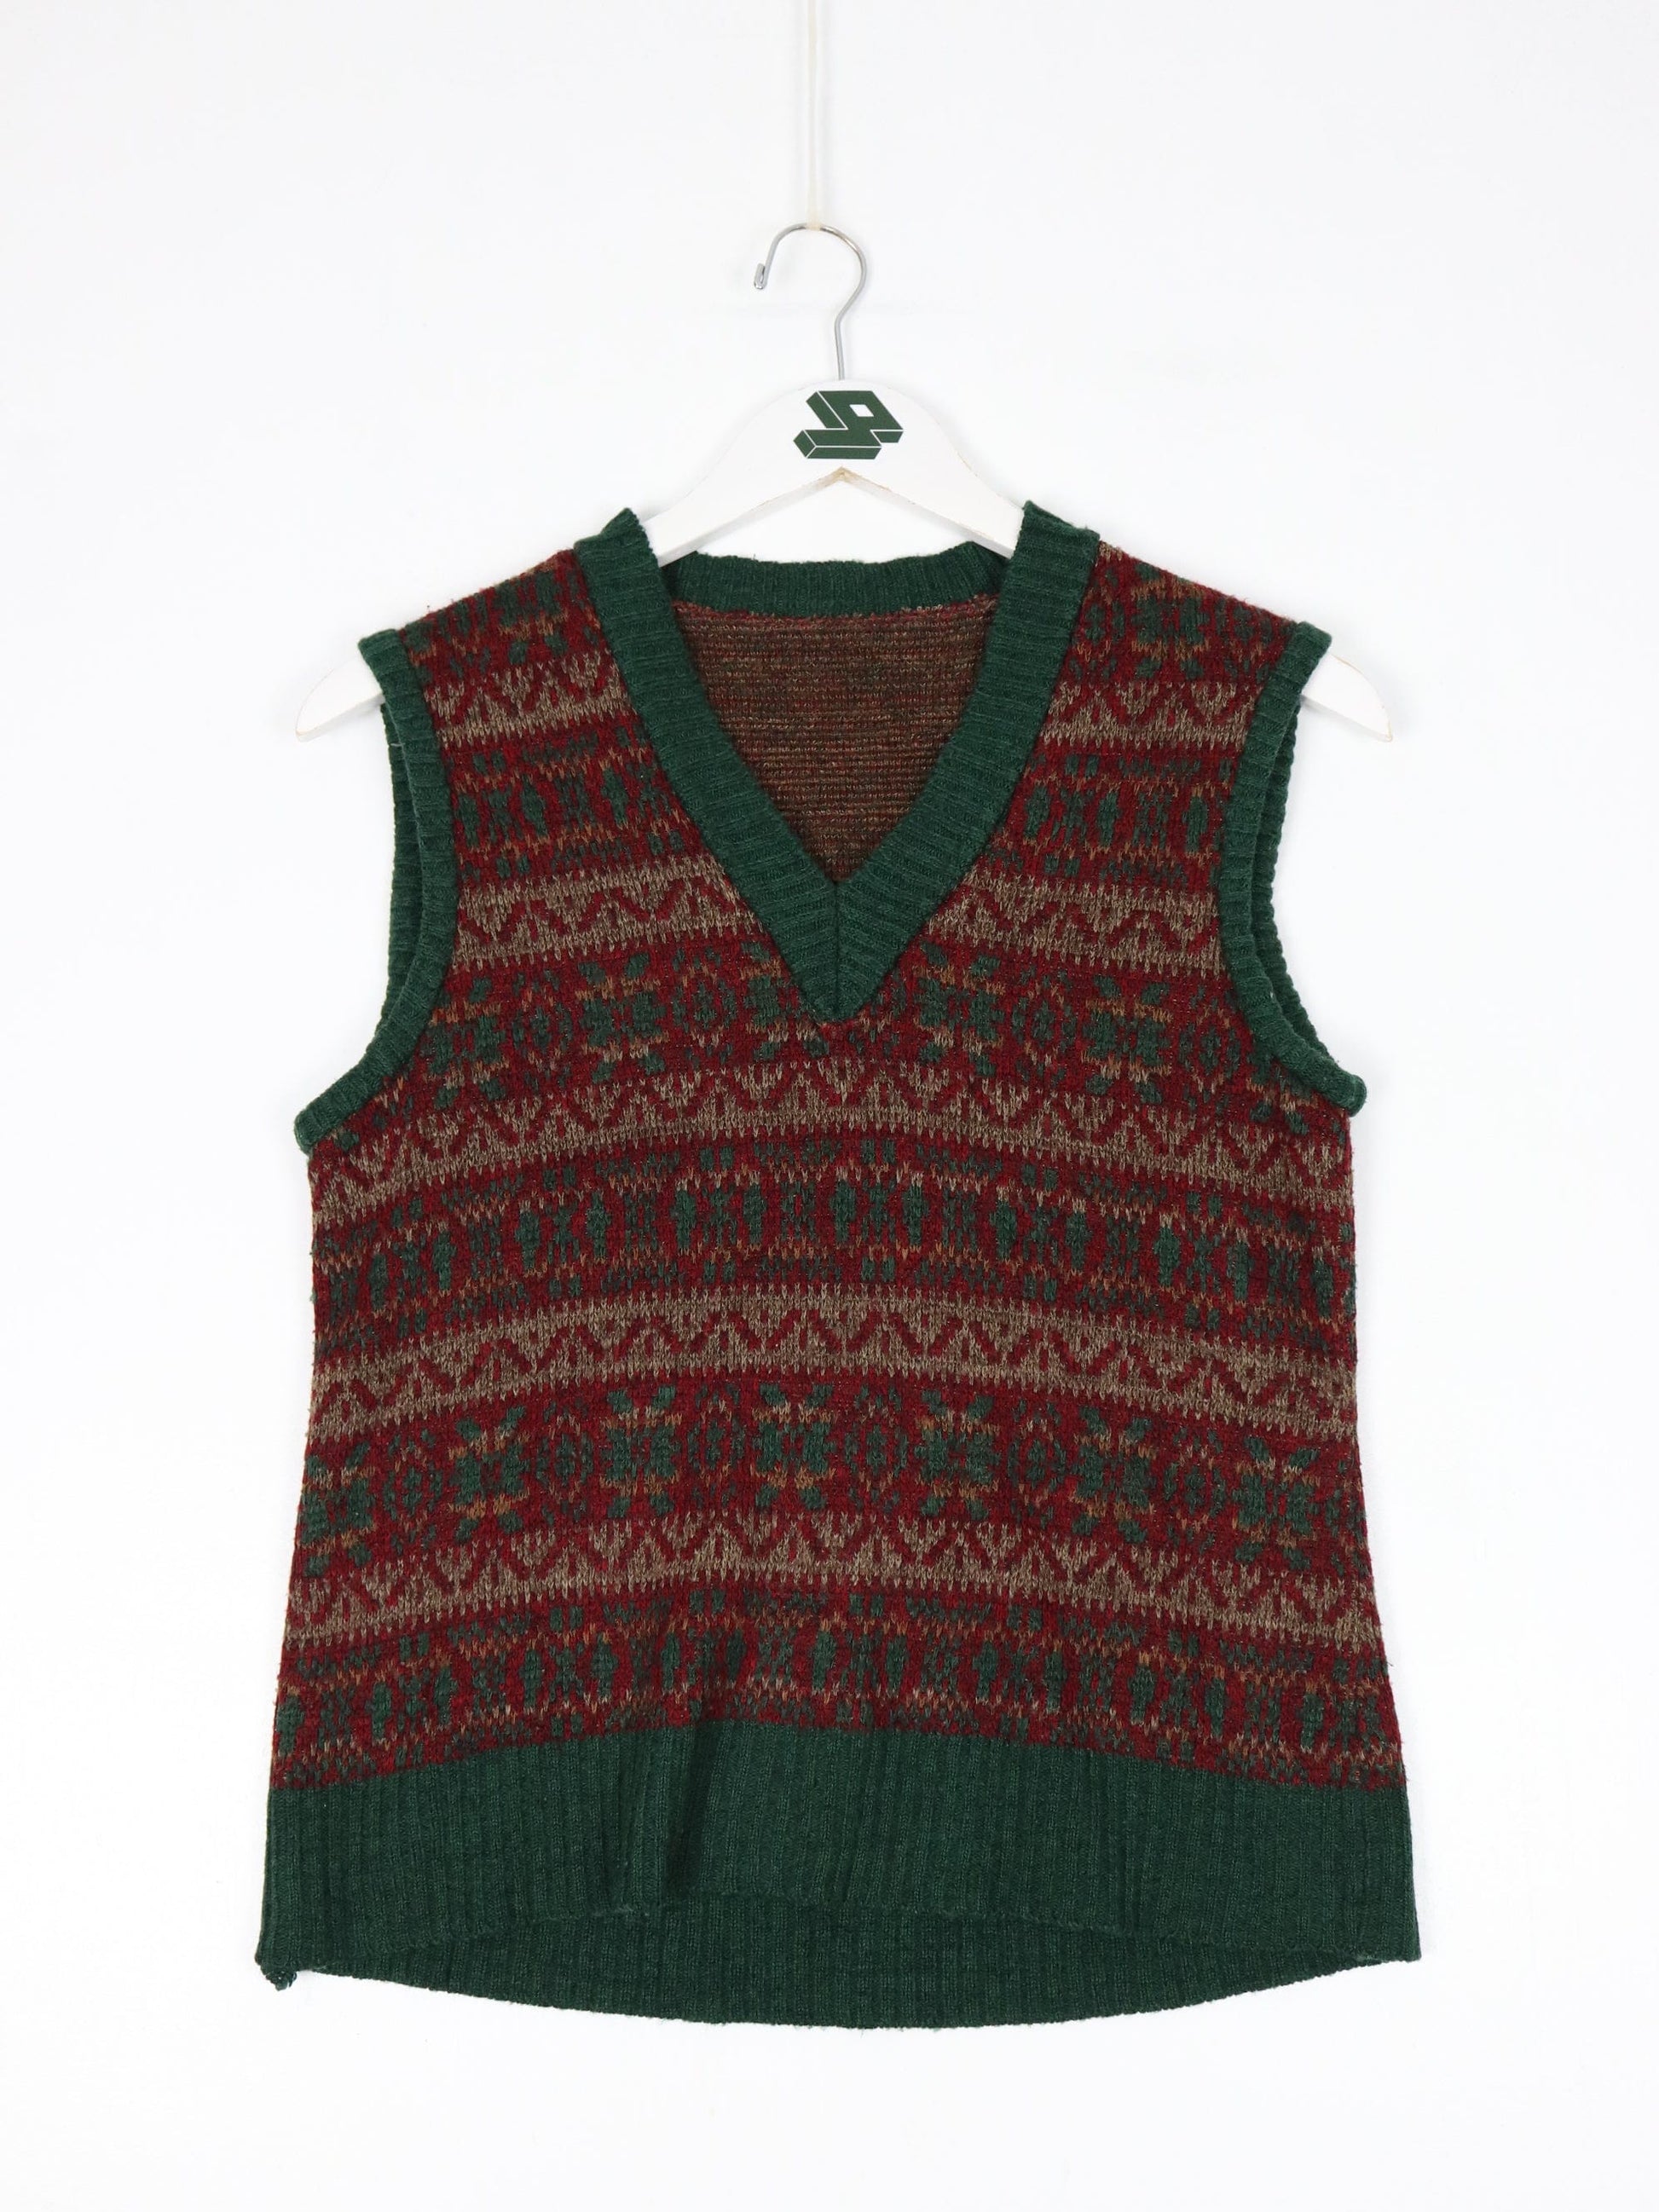 Other Knitwear Vintage Knit Vest Youth M Red Sweater Pattern